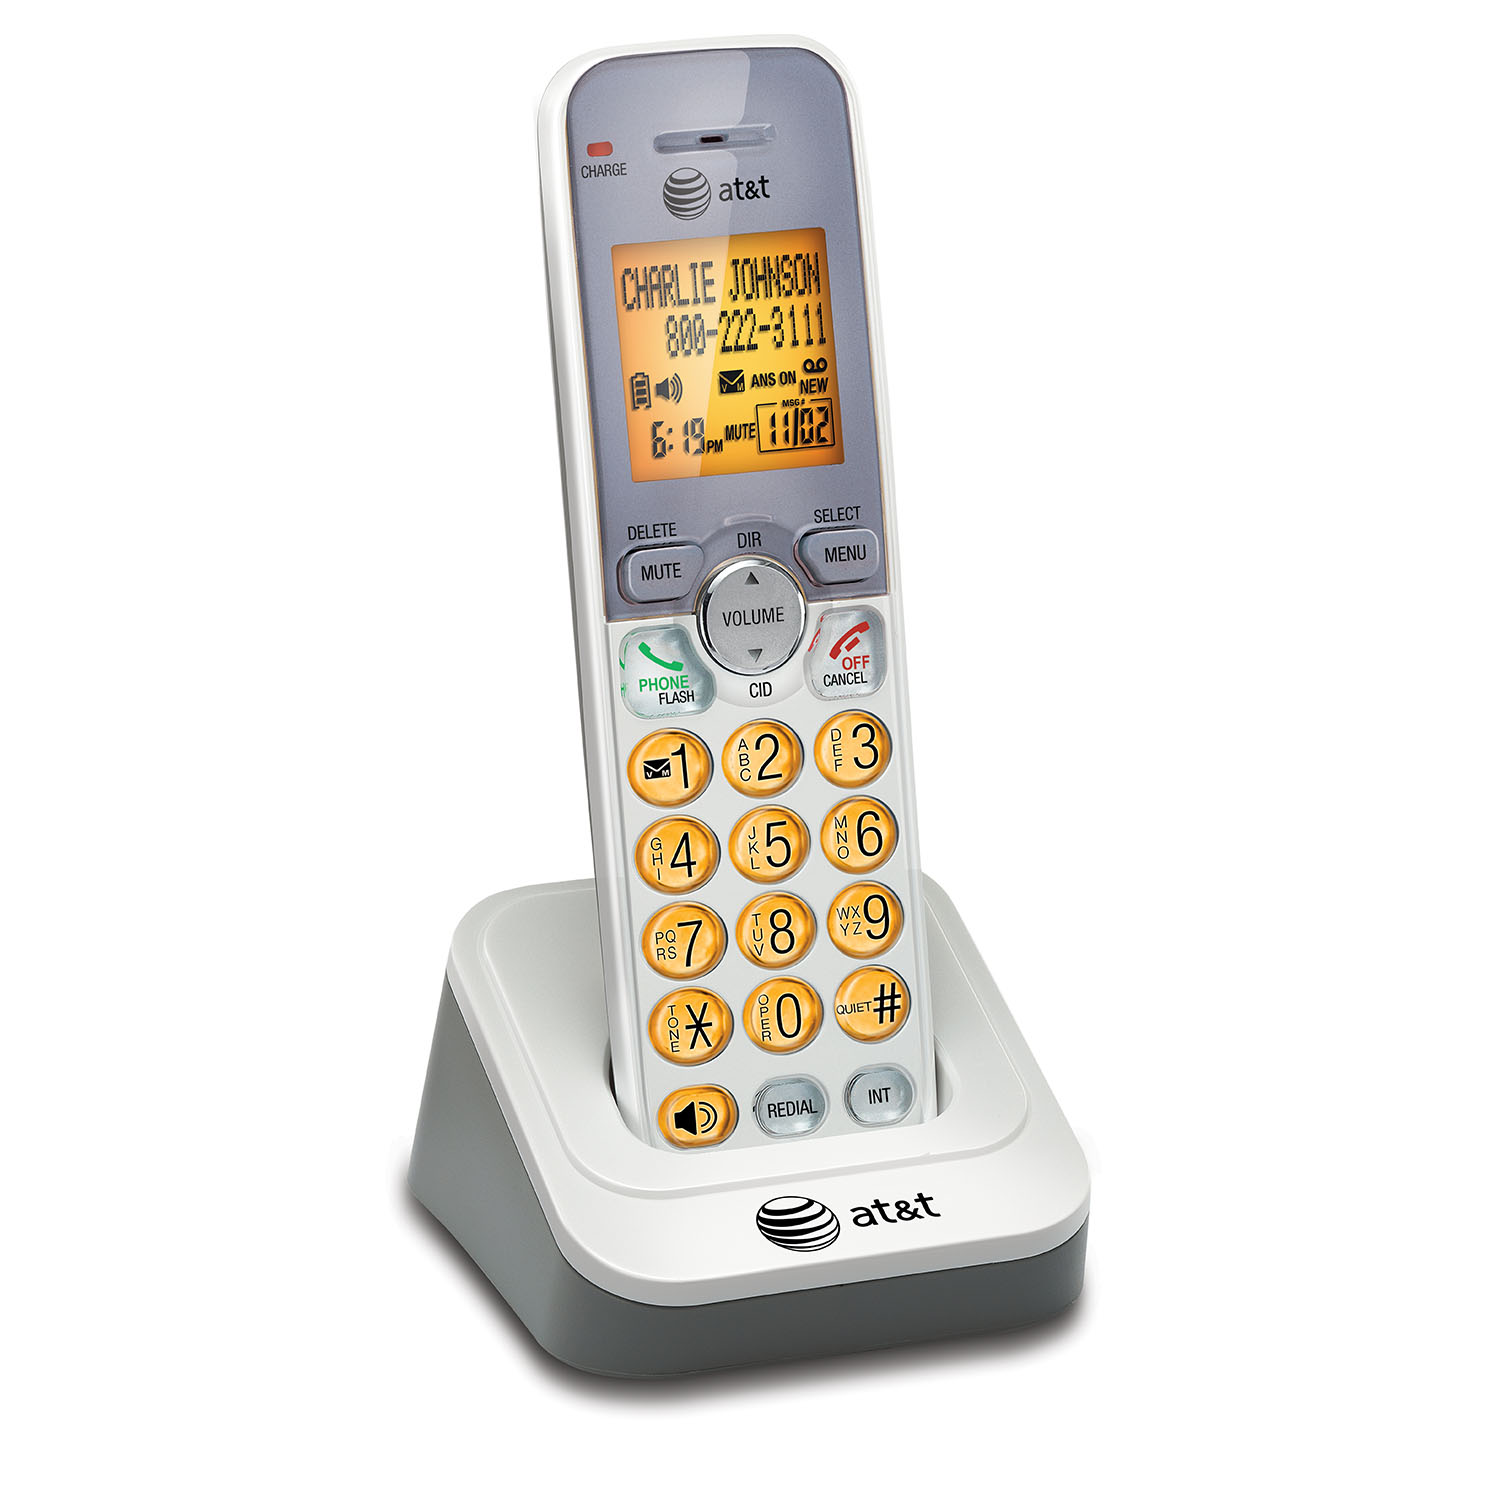 5 handset cordless answering system with caller ID/call waiting - view 6